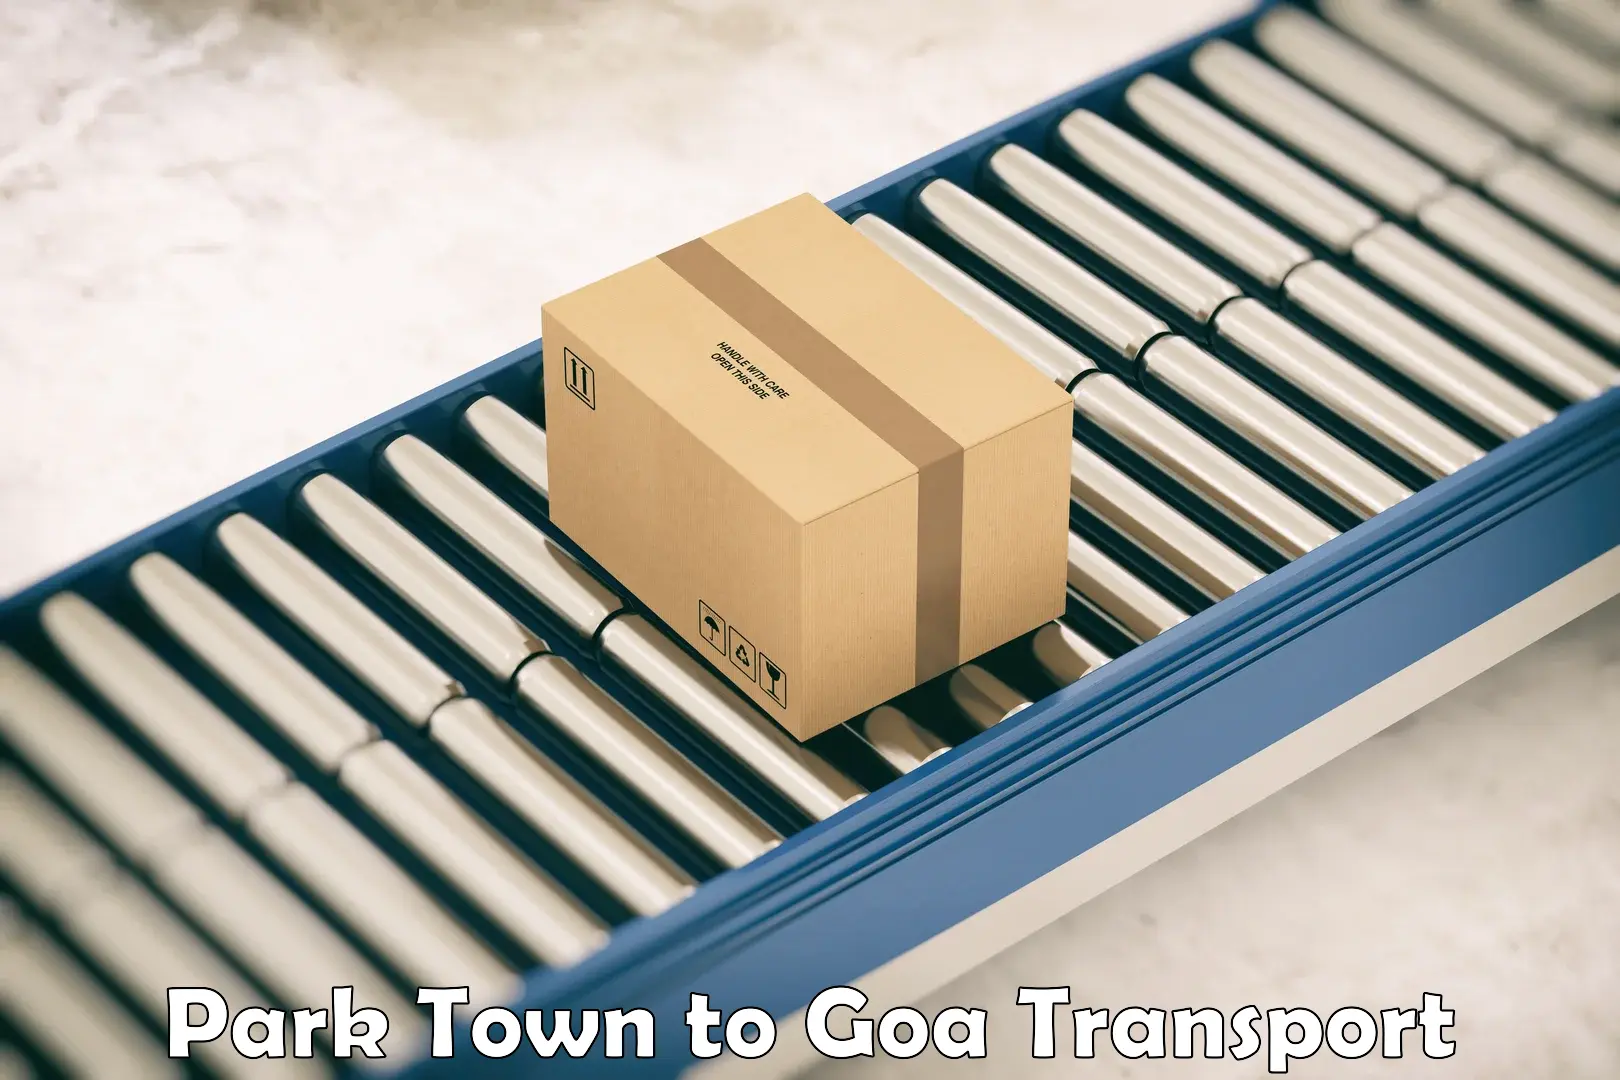 Daily transport service Park Town to Goa